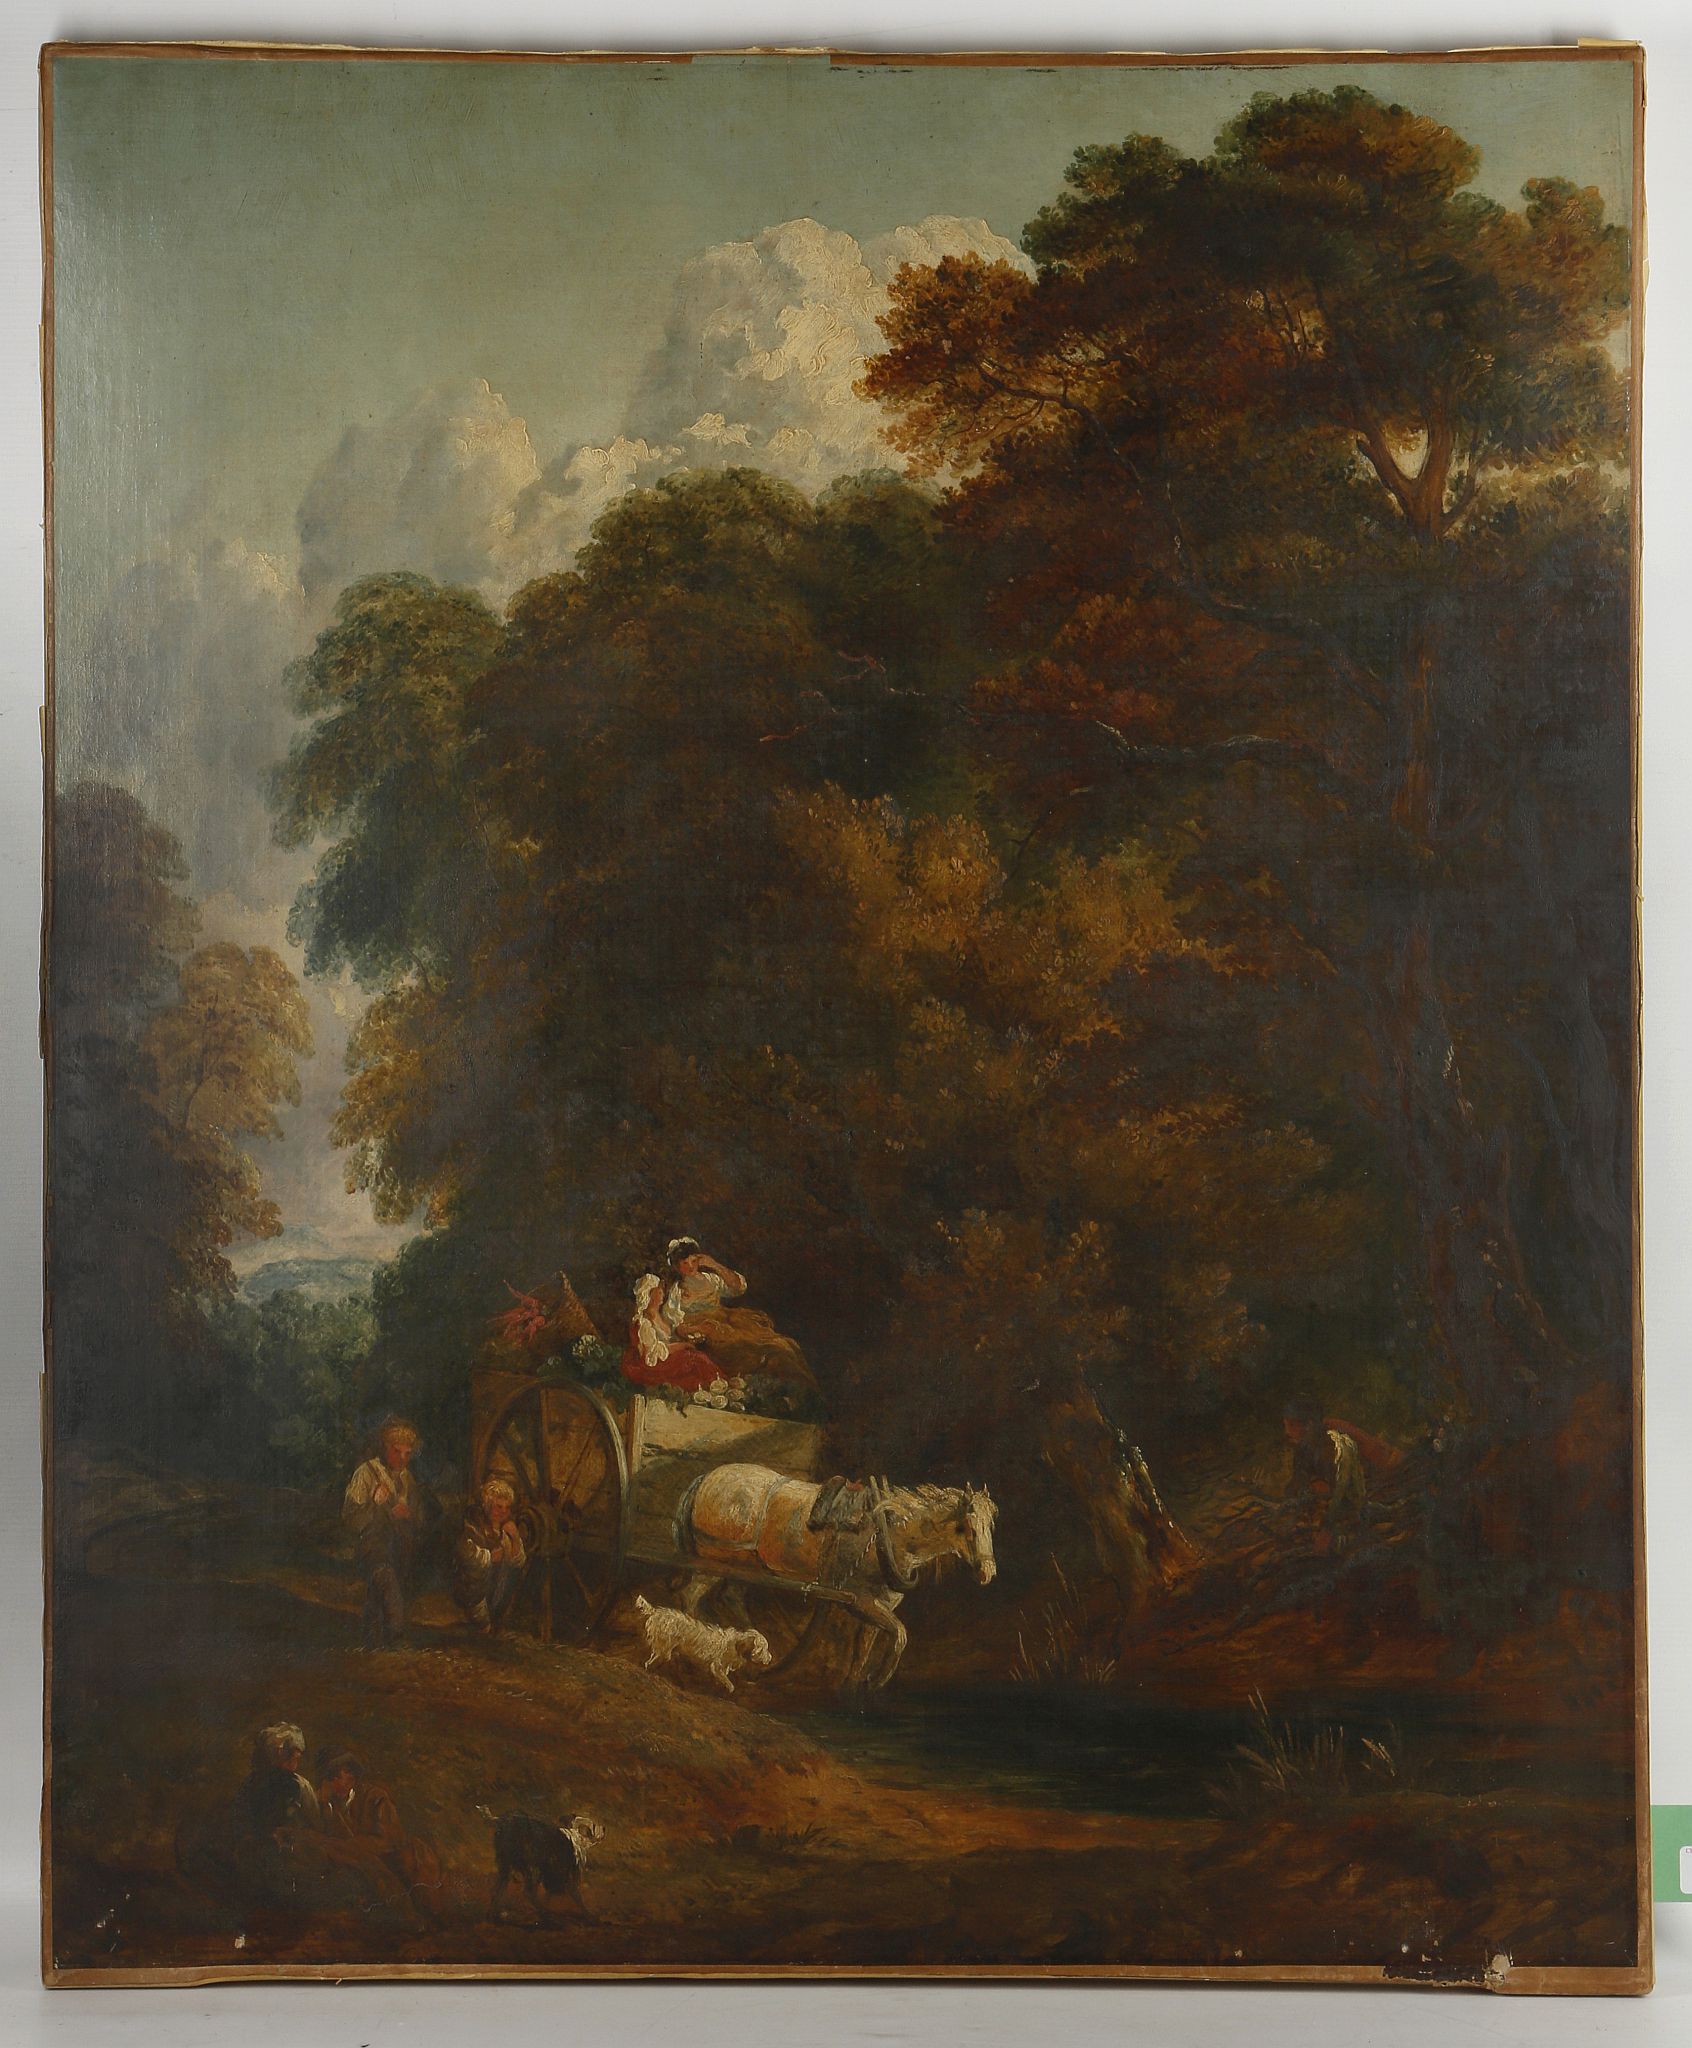 Late 18th century English school, 'Off to Market'. Oil on canvas, a family of farmers in a laden